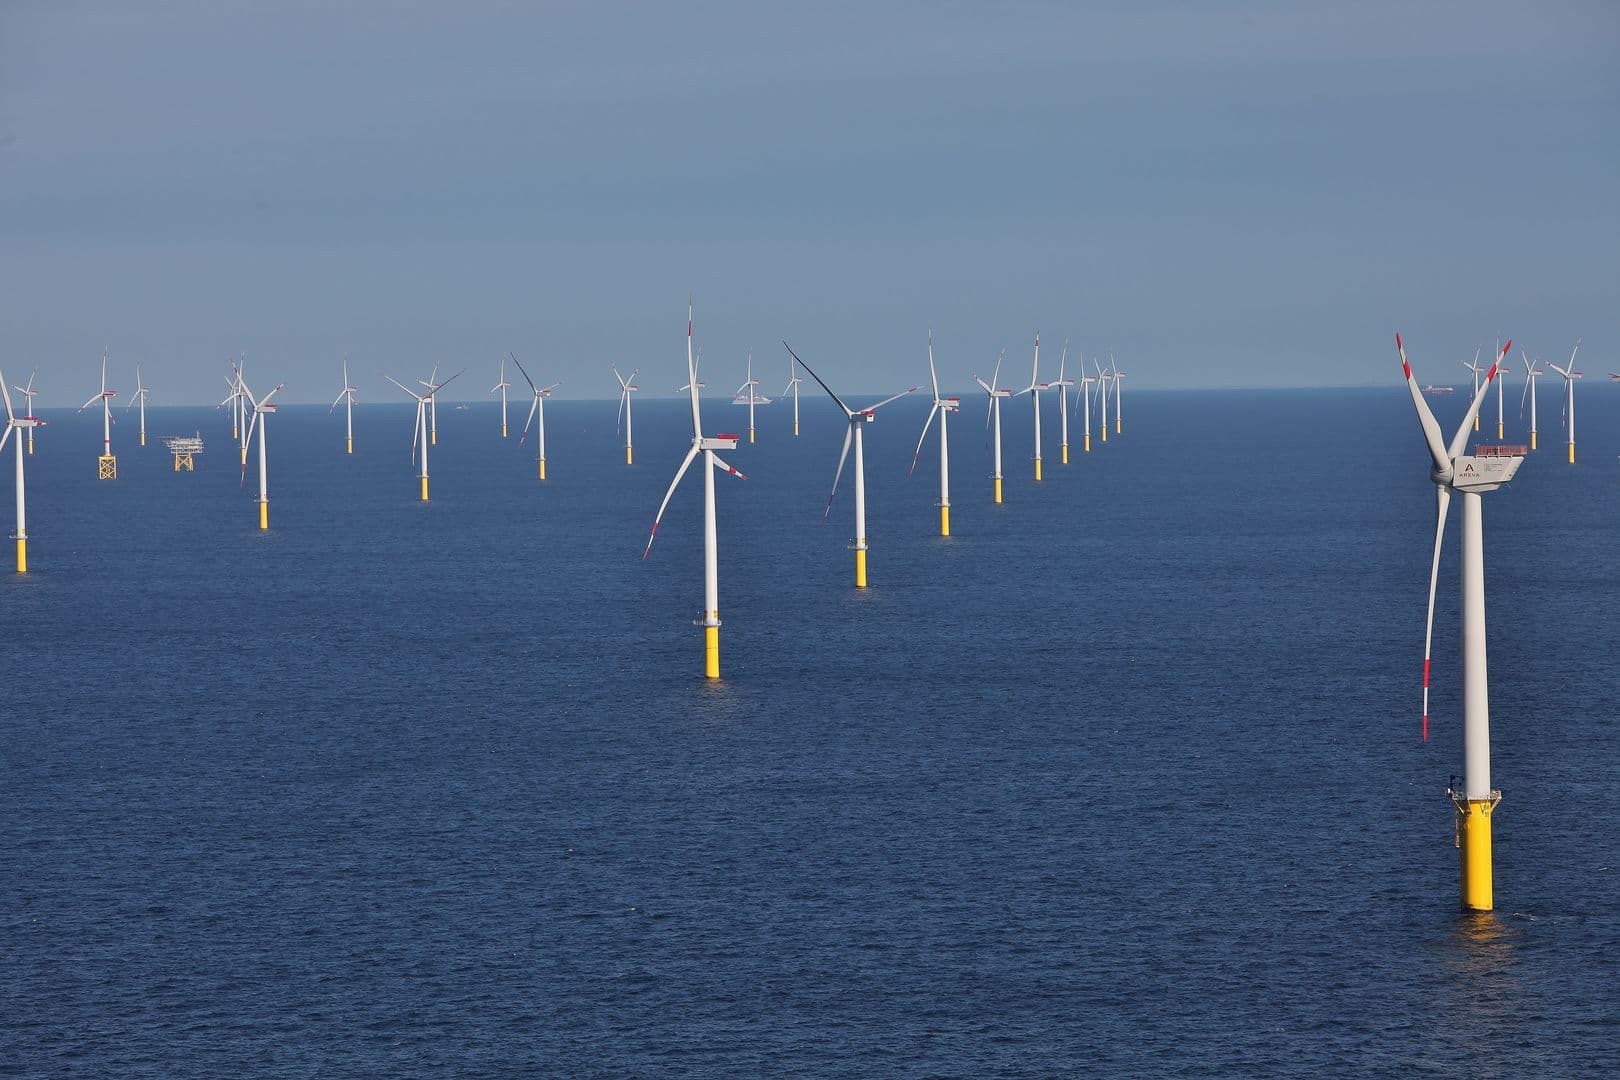 Offshore wind farm energy projects: enera, C/sells, NEW 4.0